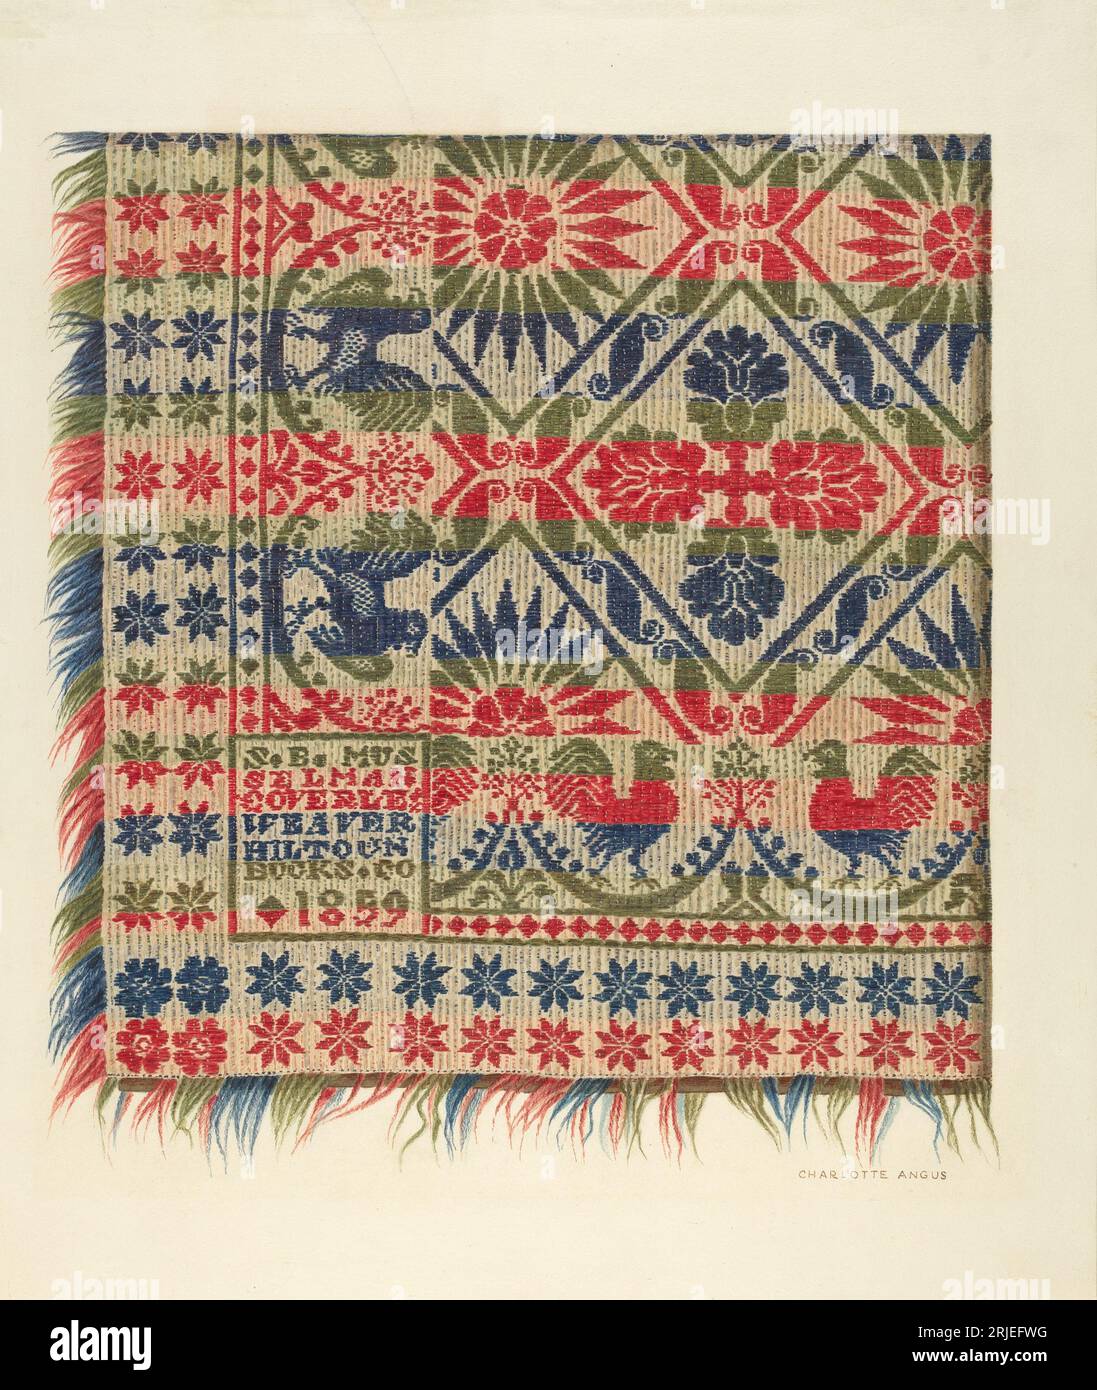 Woven Coverlet circa 1940 by Charlotte Angus Stock Photo